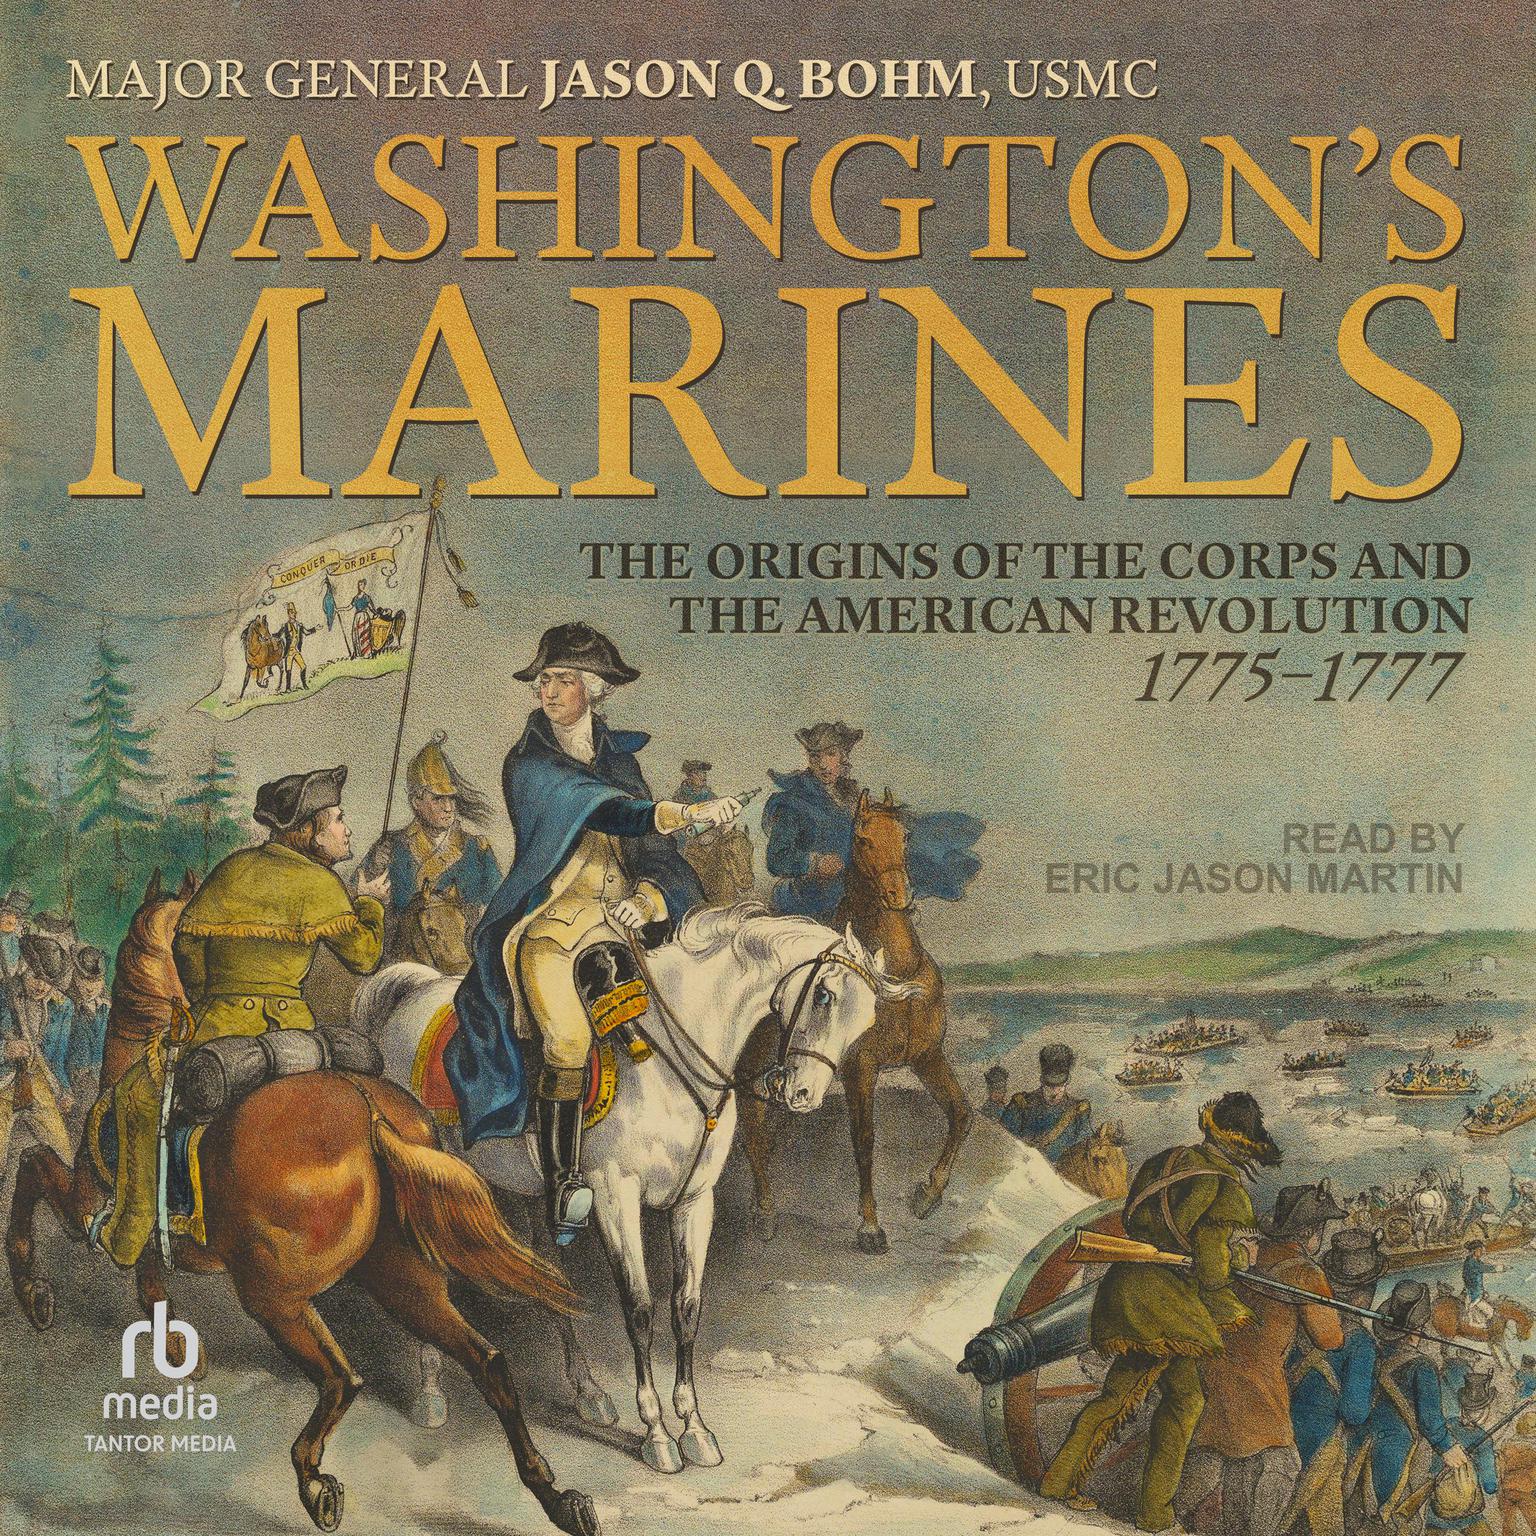 Washington’s Marines: The Origins of the Corps and the American Revolution, 1775-1777 Audiobook, by Major General Jason Q. Bohm, USMC